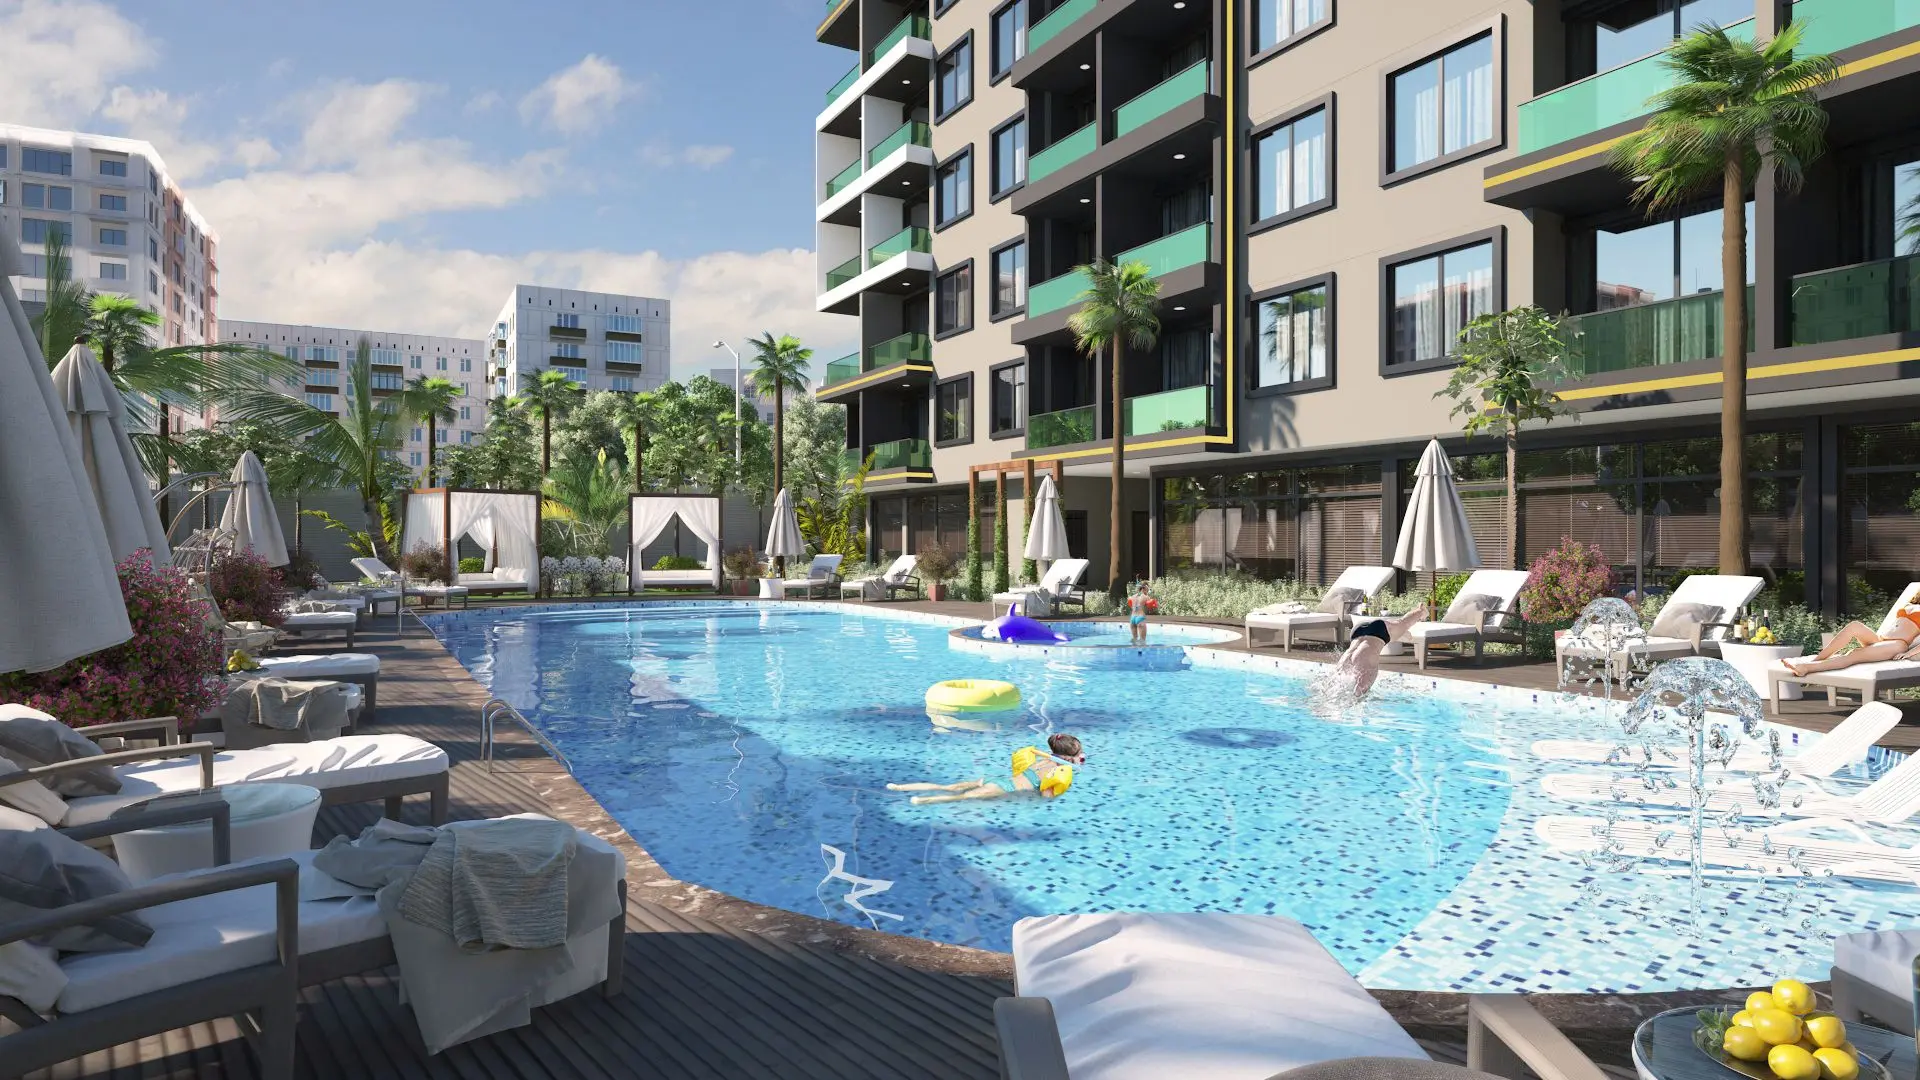 START OF SALES OF A NEW PROJECT 600 M FROM THE SEA IN AVSALLAR ALANYA